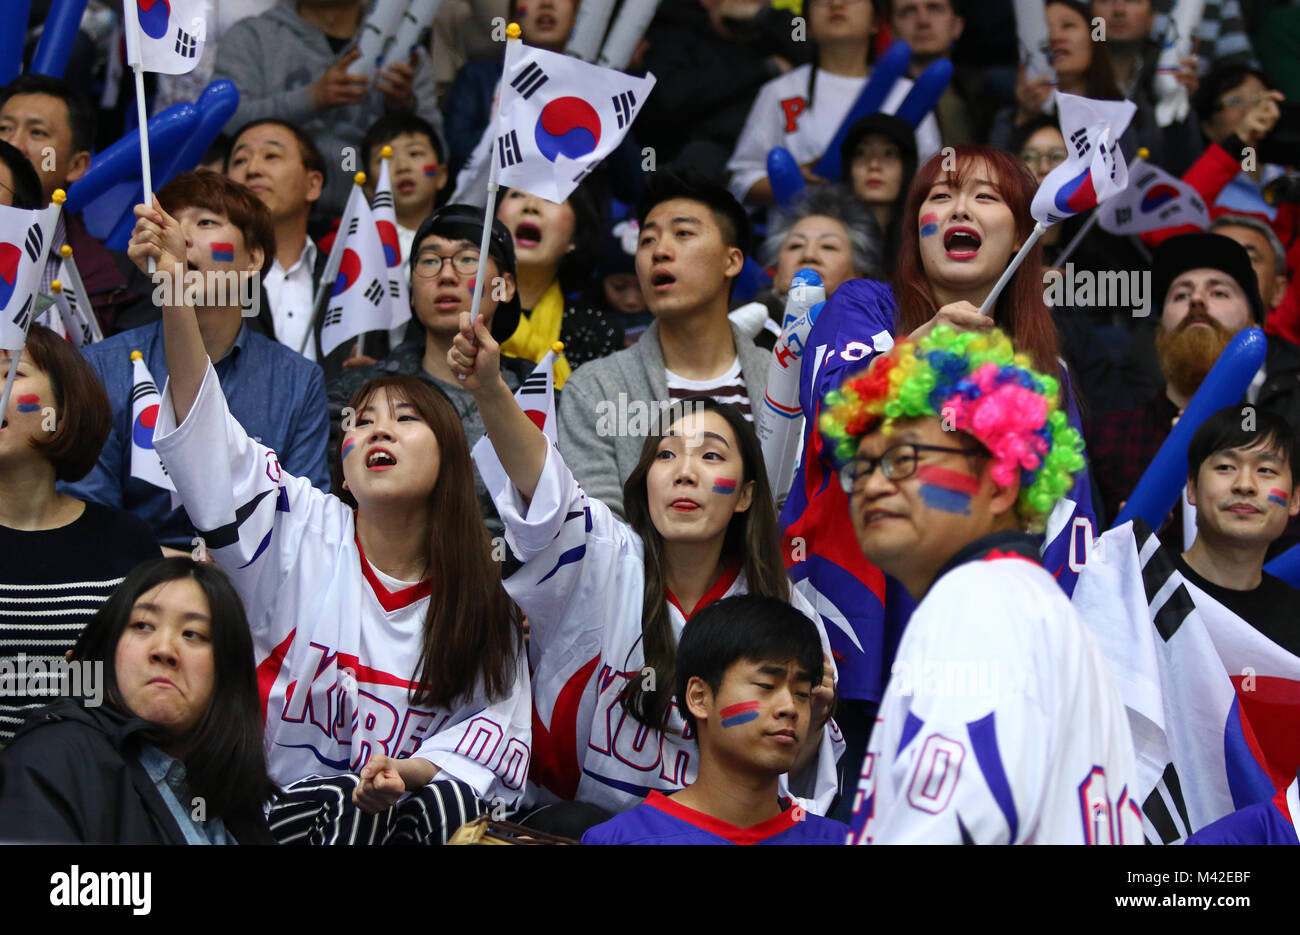 KYIV, UKRAINE - APRIL 28, 2017: South Korean fans show their support during IIHF 2017 Ice Hockey World Championship Div 1 Group A game against Ukraine Stock Photo